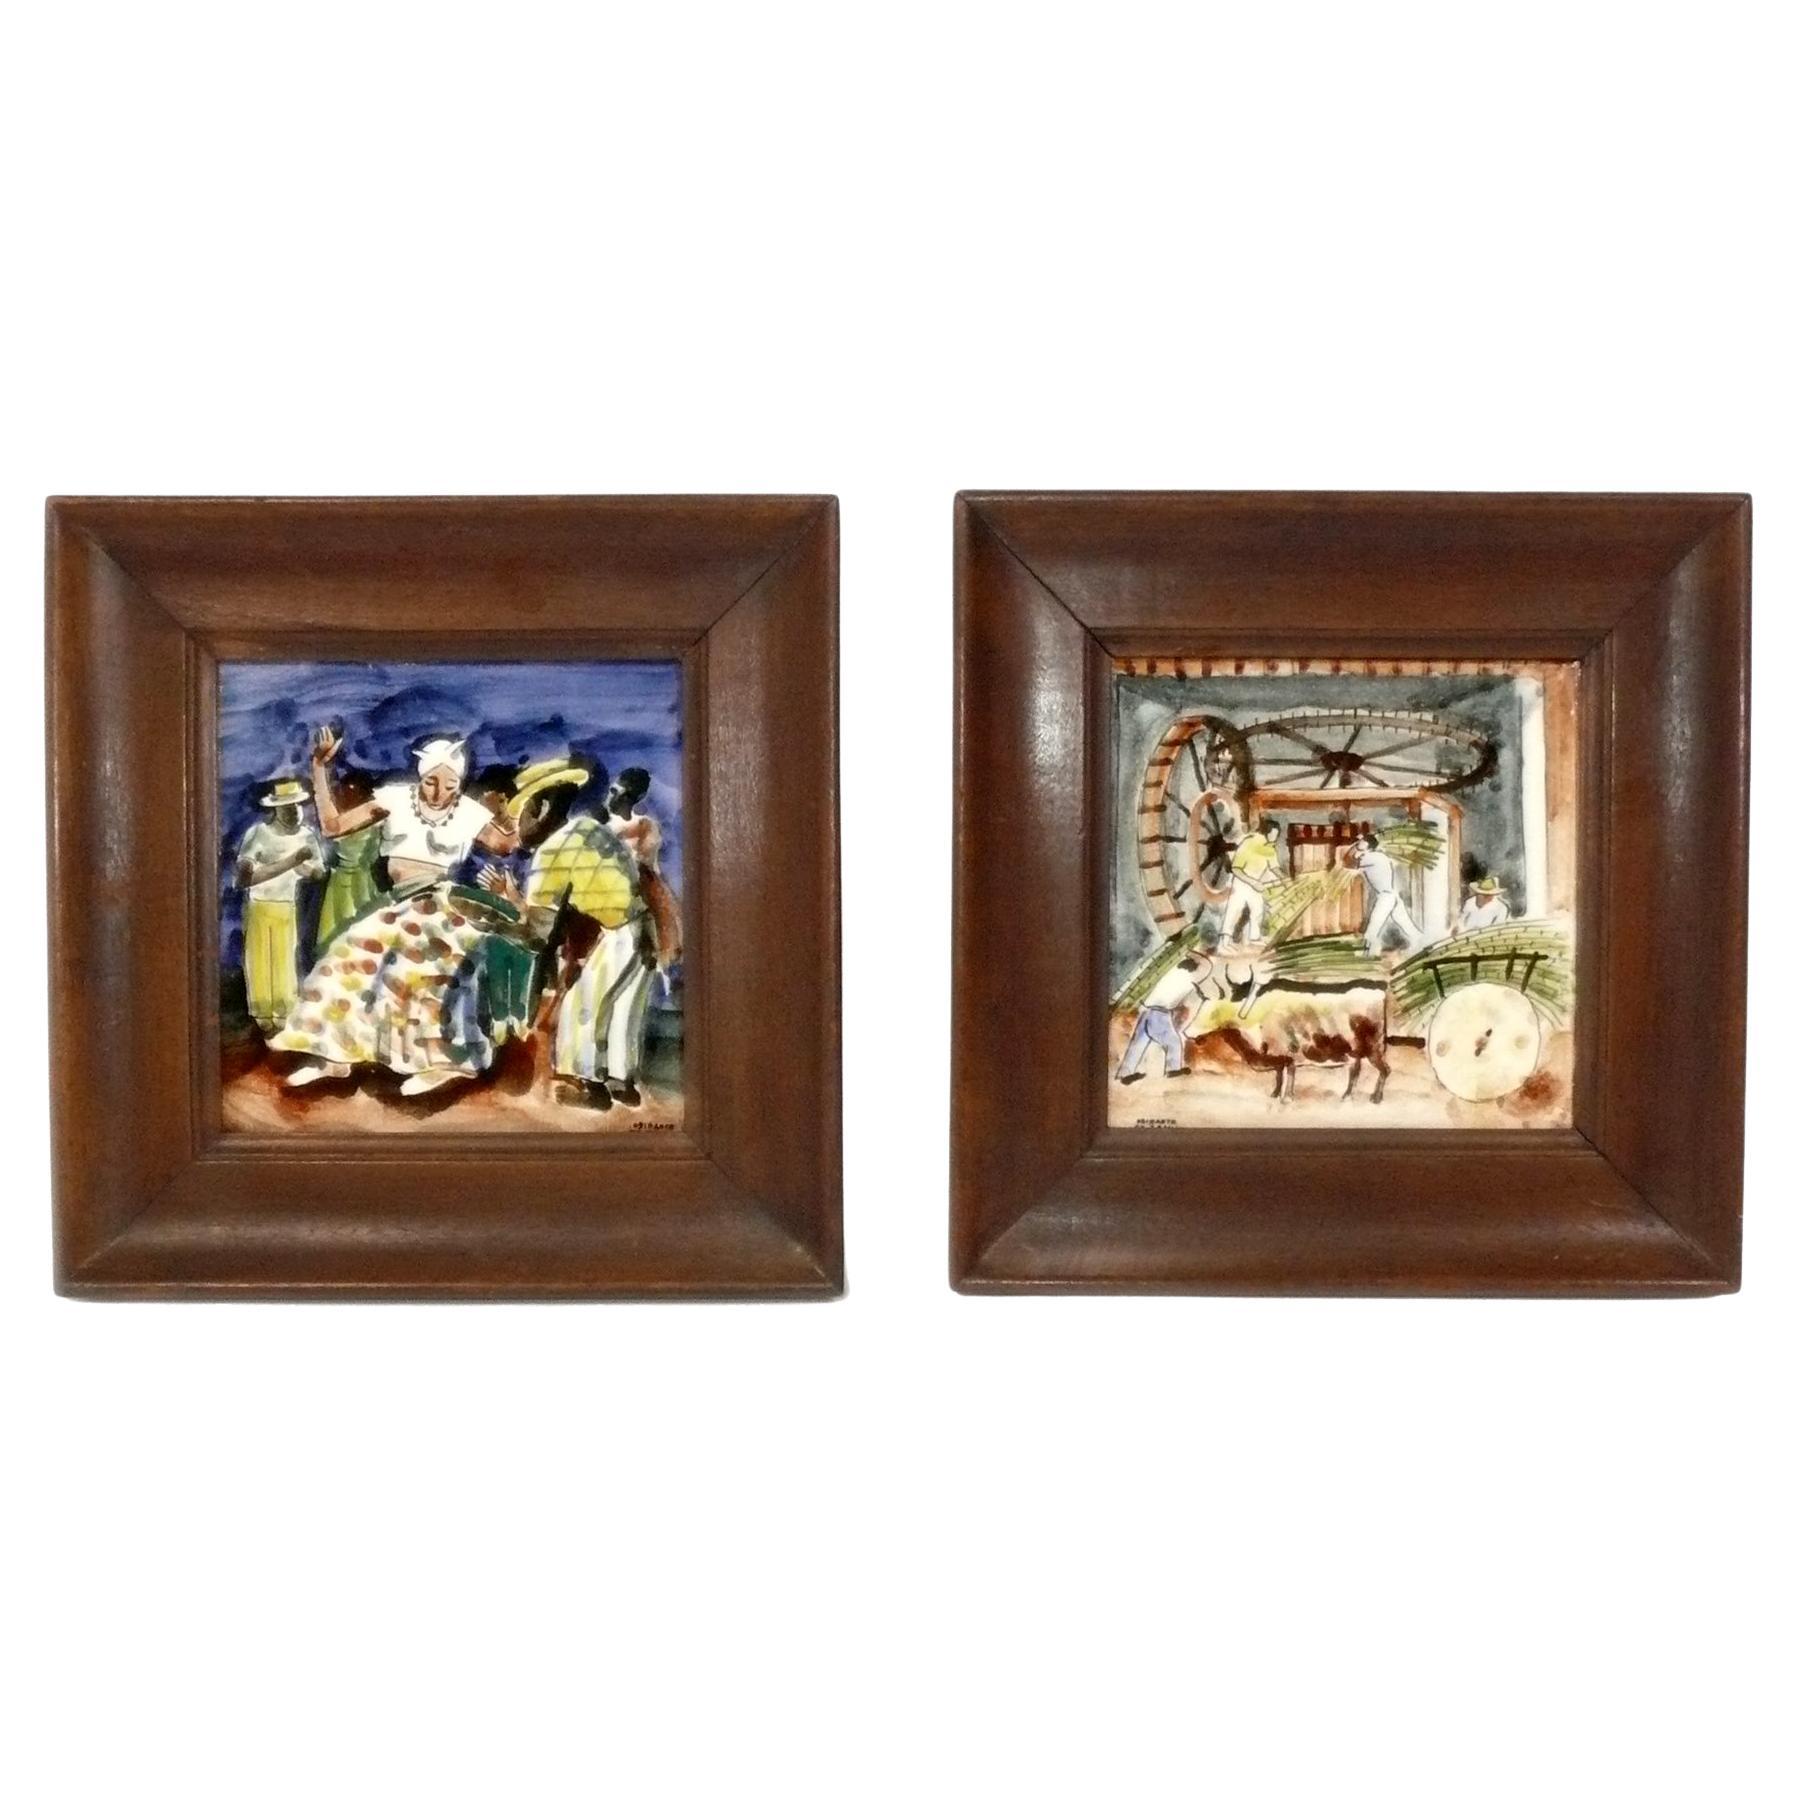 Paulo Rossi Osir Brazilian Hand Painted Tile Wall Plaques